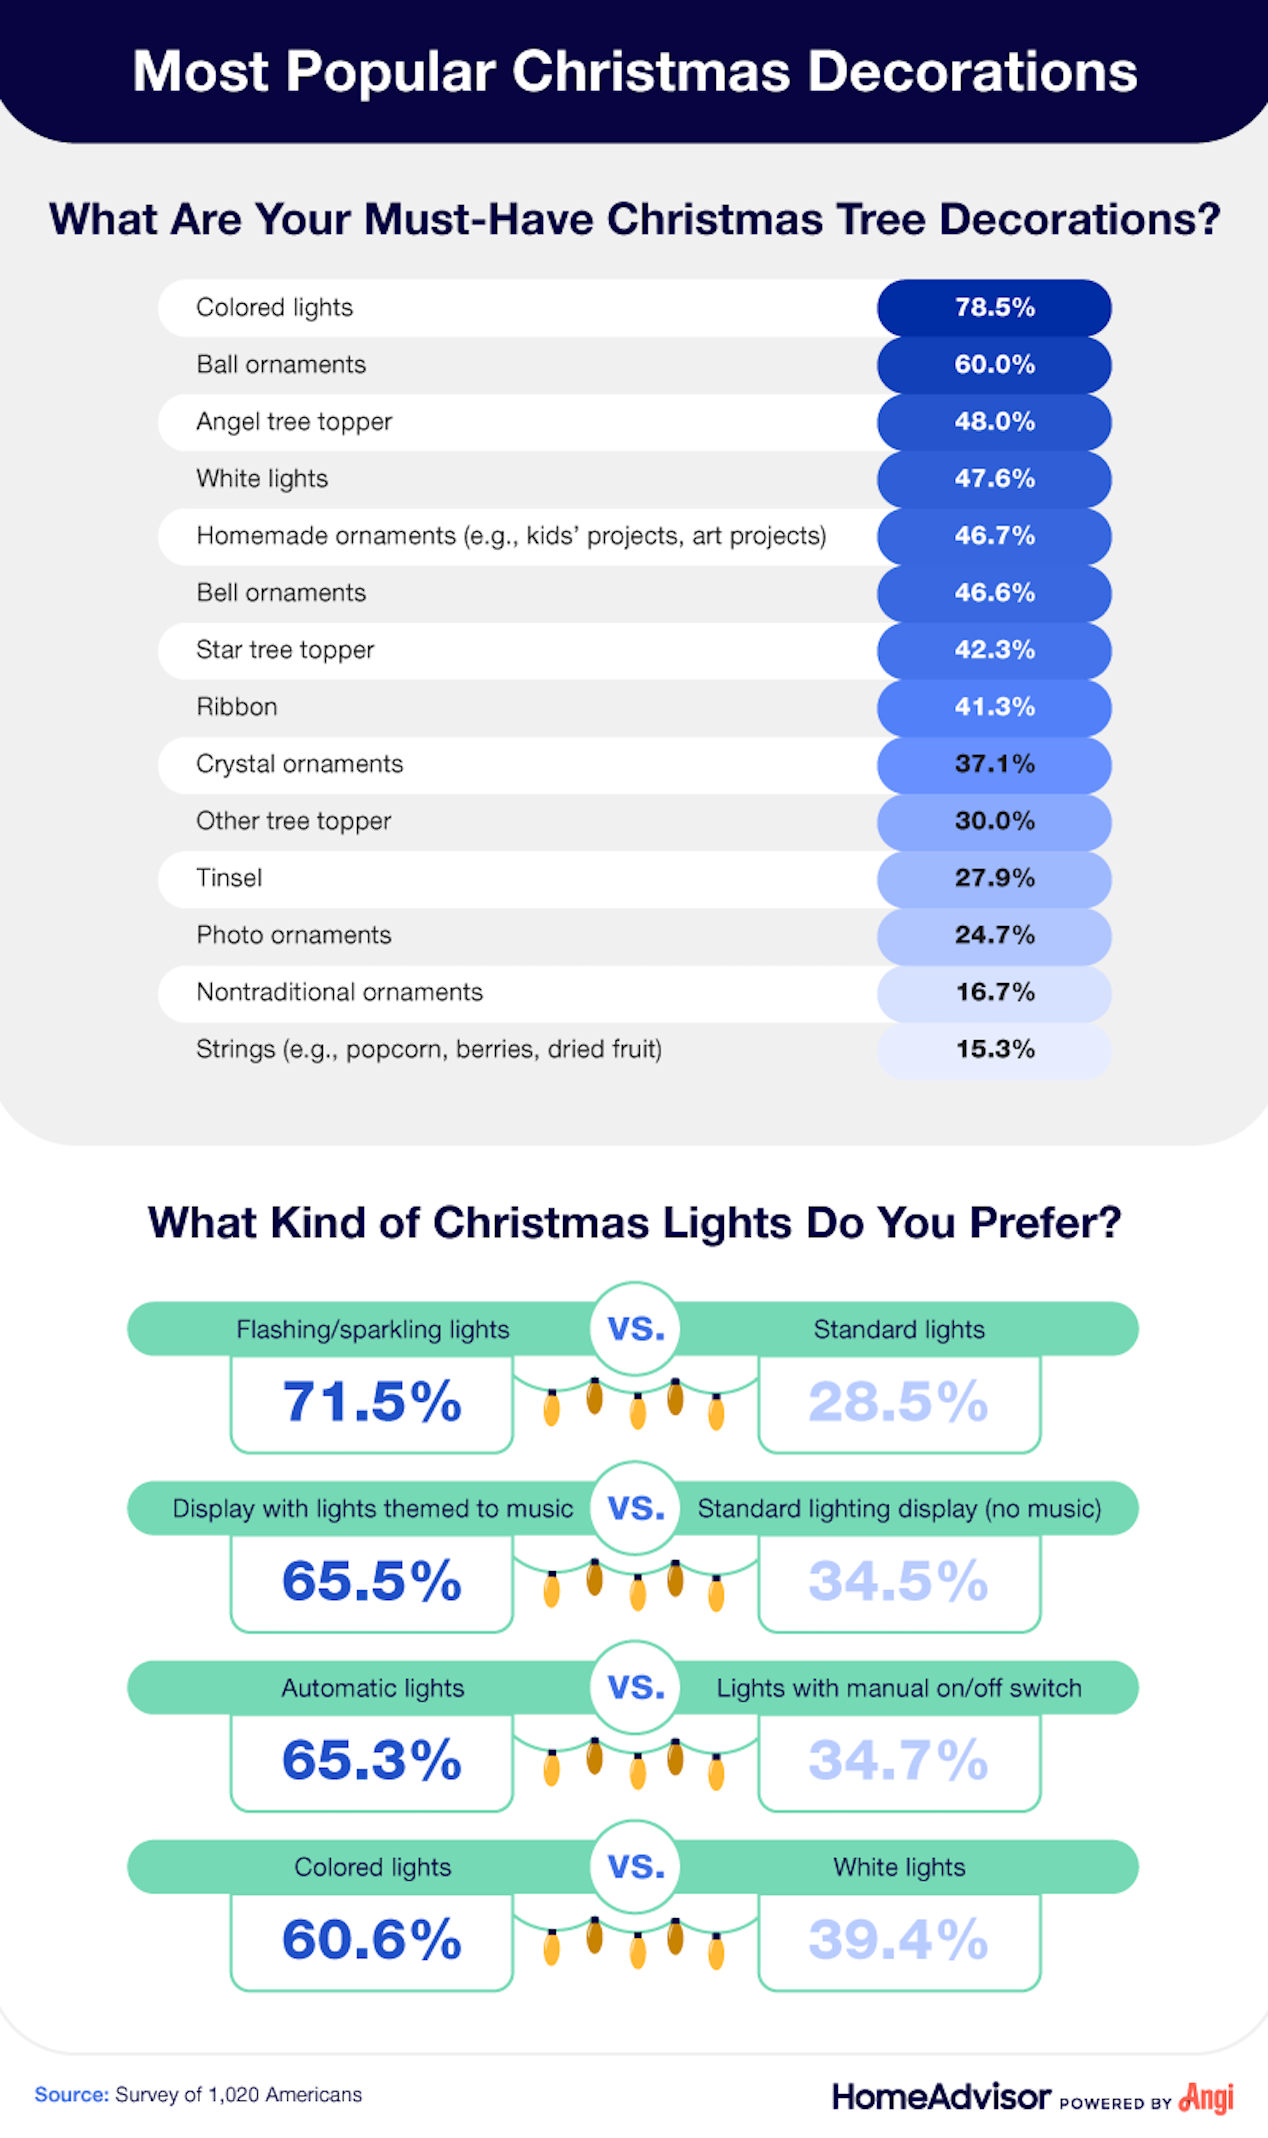 An infographic describing peoples' favorite and preferred decorations